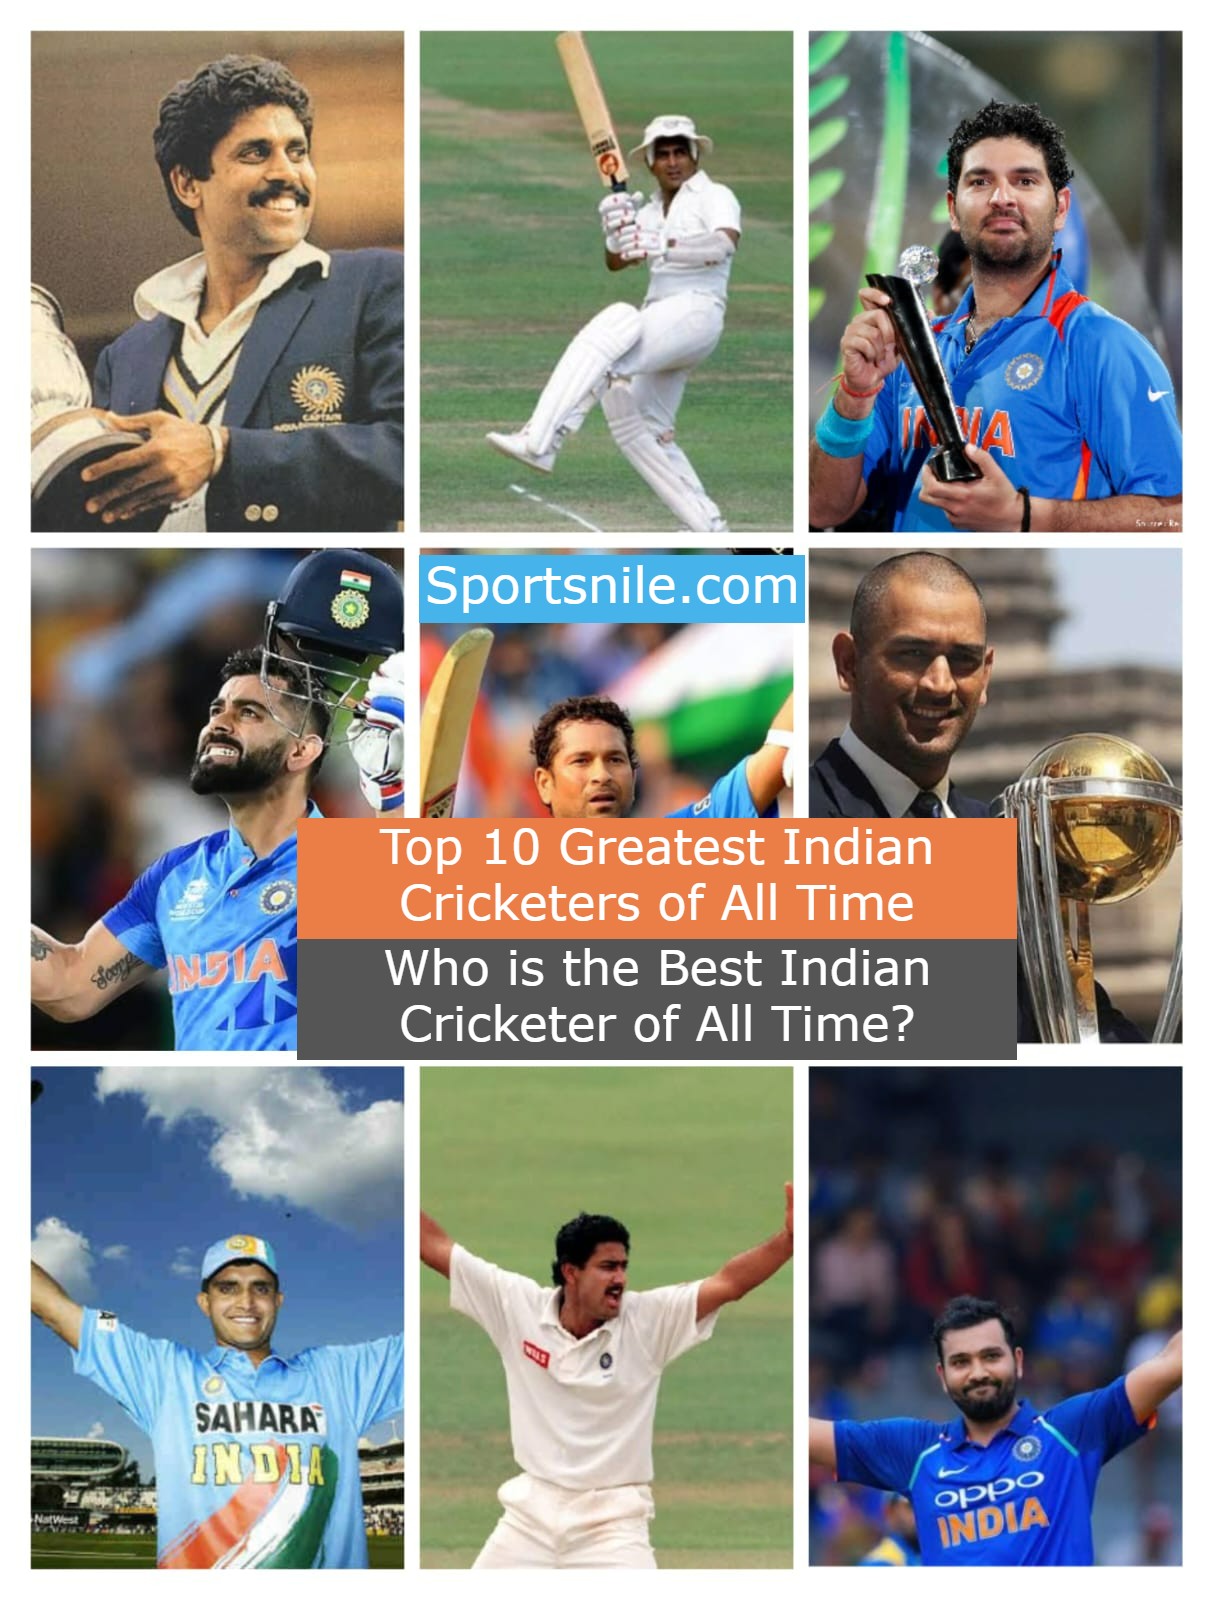 Top 10 Indian Cricketers of All Time